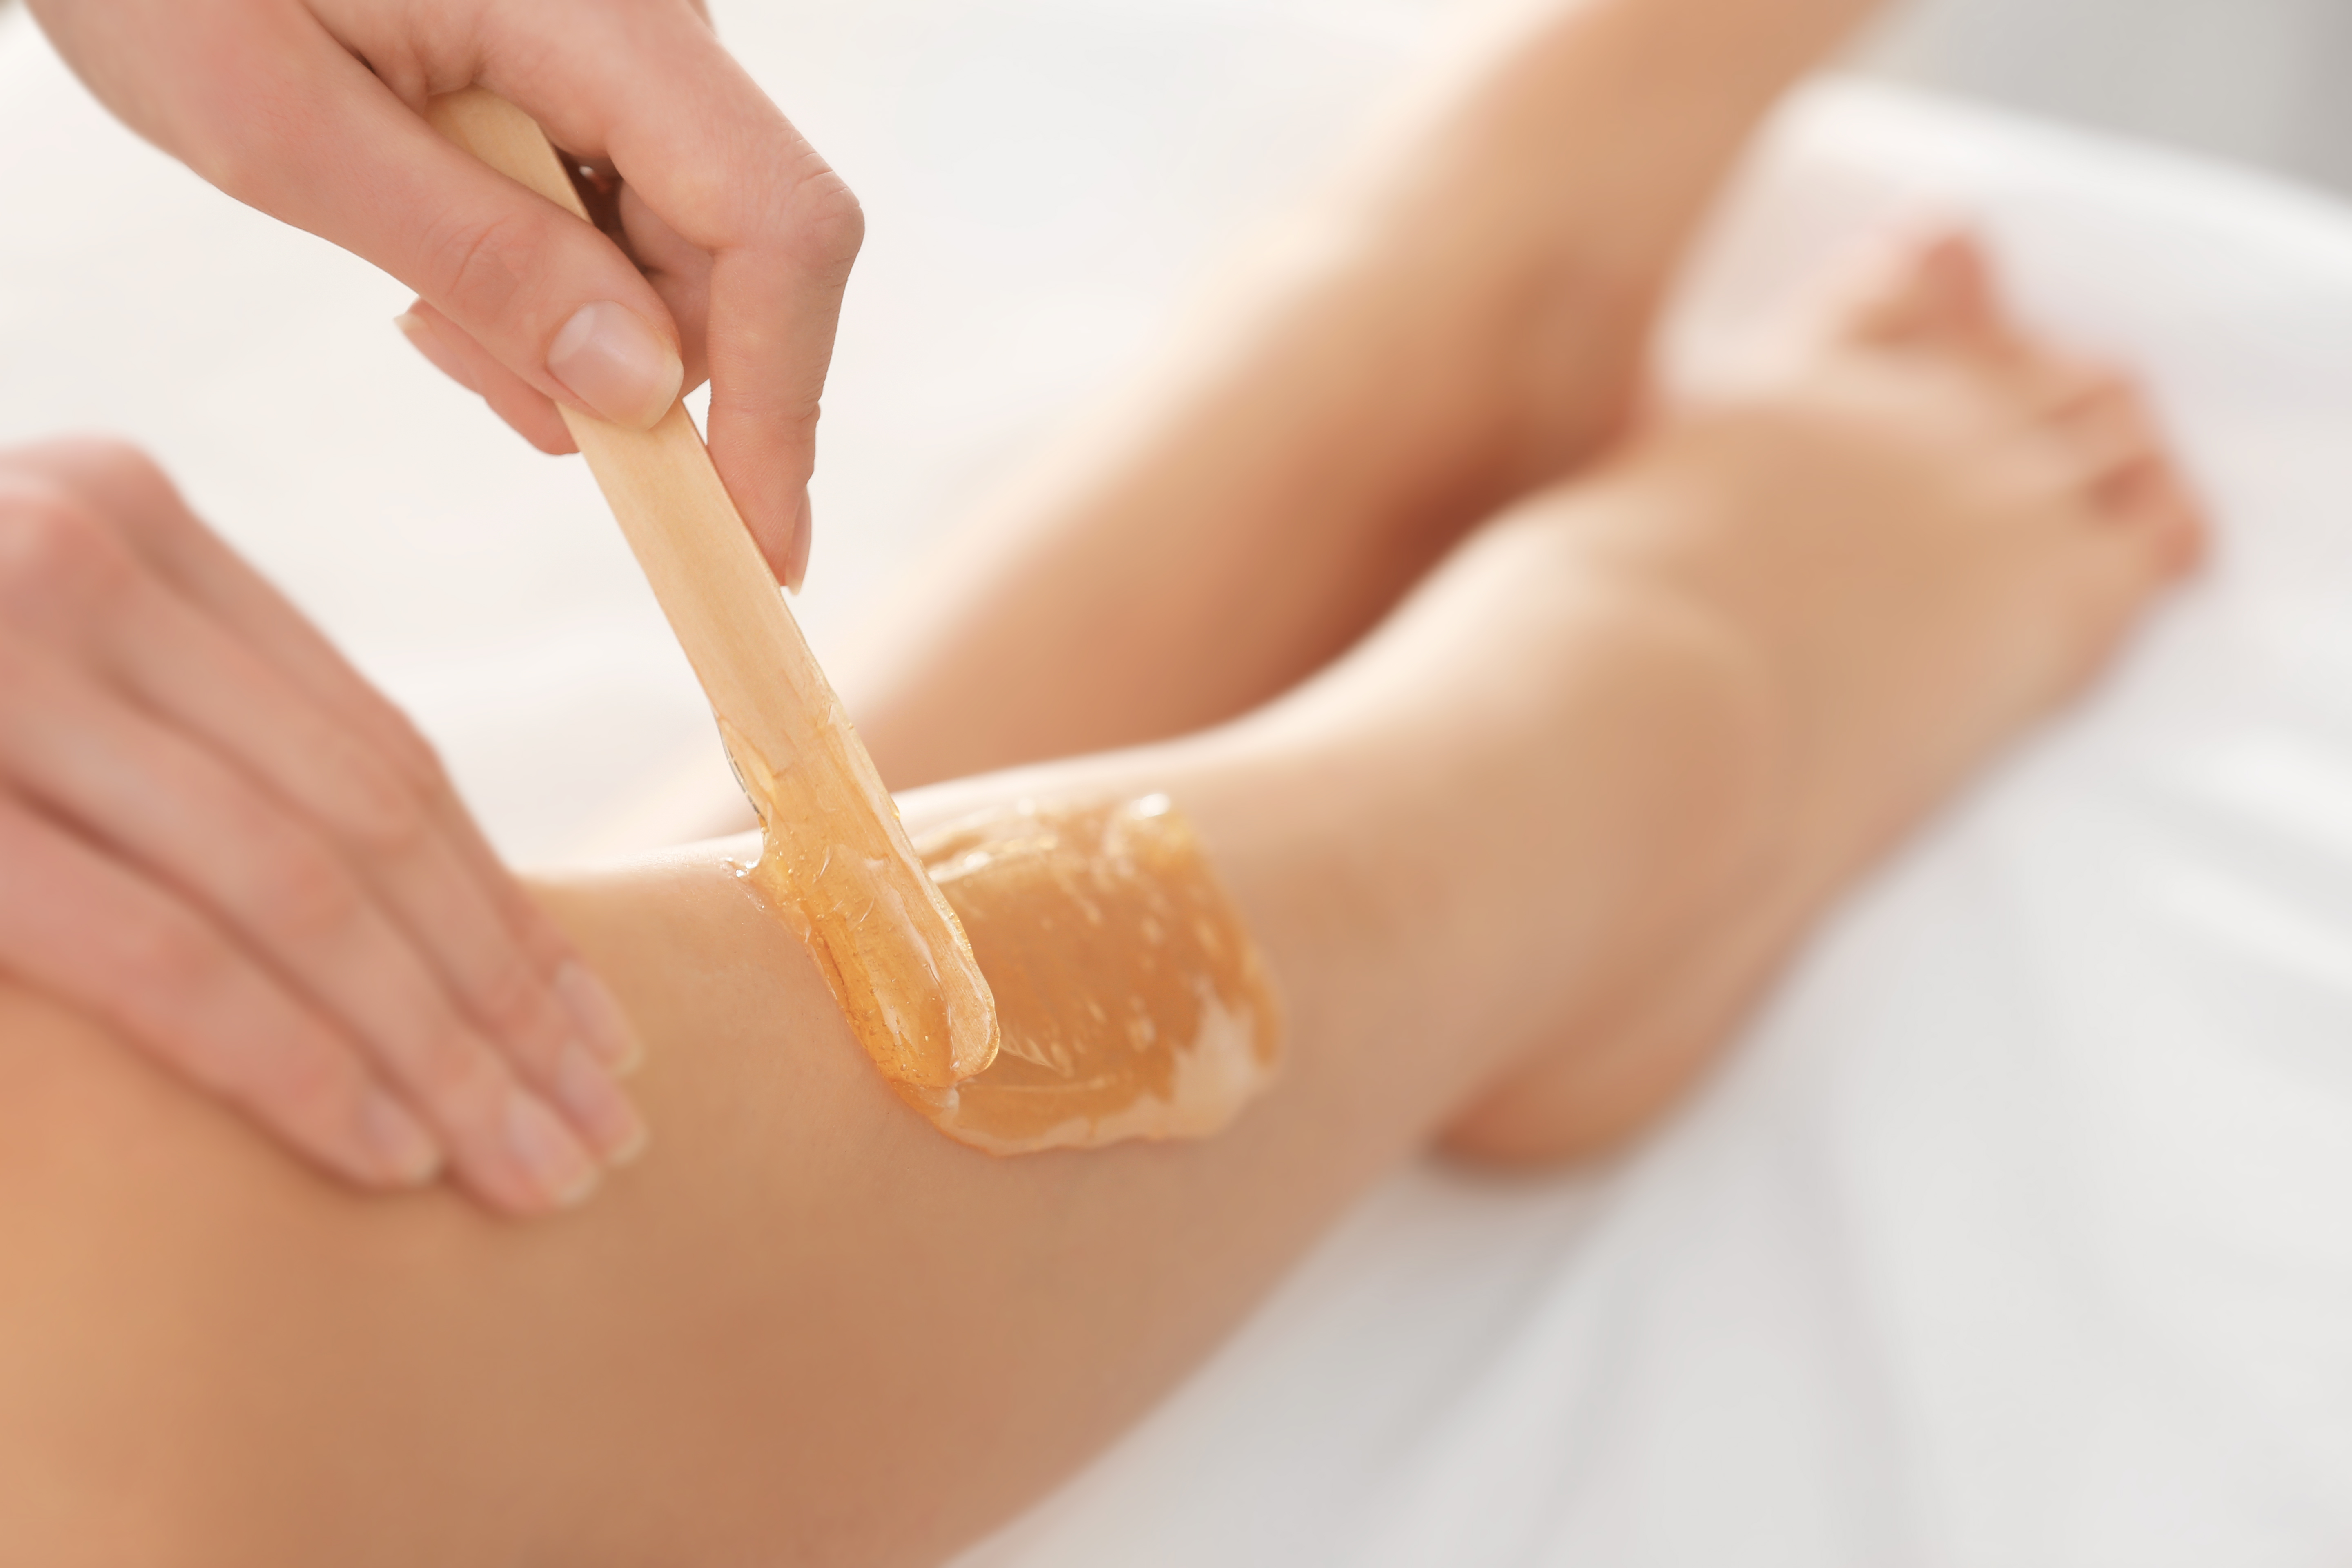 Leg being waxed for hair removal